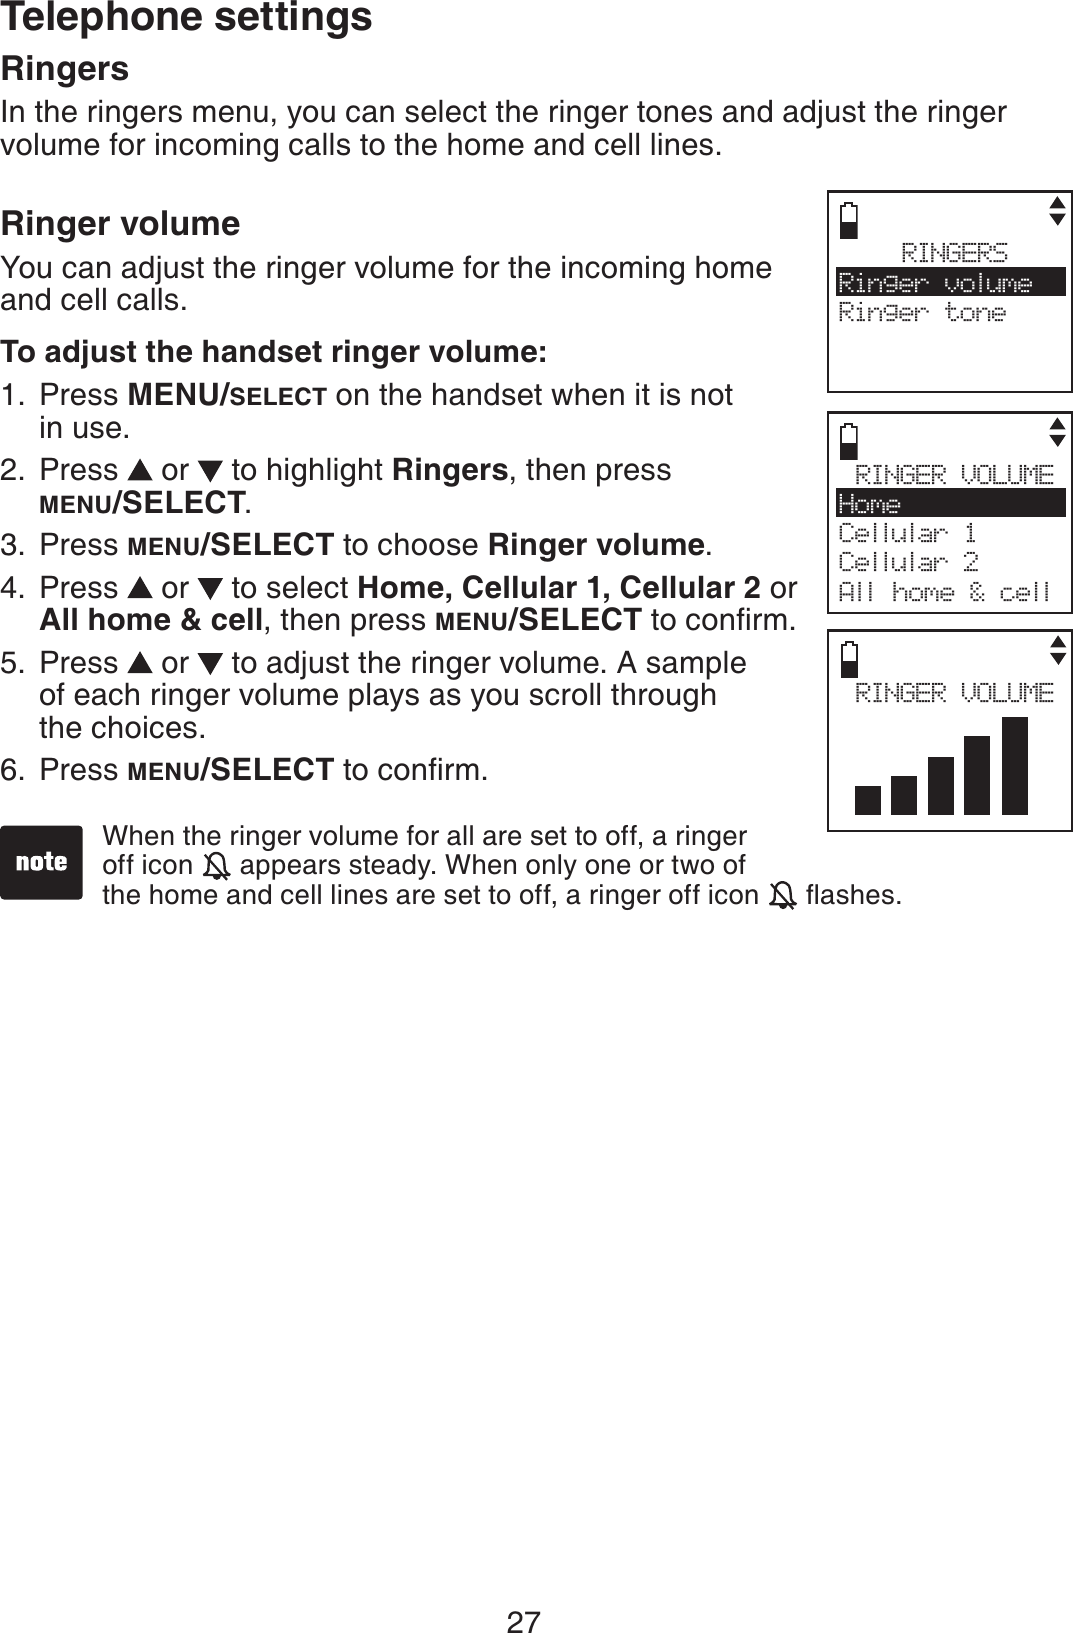 27RingersIn the ringers menu, you can select the ringer tones and adjust the ringer volume for incoming calls to the home and cell lines.Ringer volumeYou can adjust the ringer volume for the incoming home and cell calls.To adjust the handset ringer volume:Press MENU/SELECT on the handset when it is not in use.Press   or   to highlight Ringers, then press MENU/SELECT.Press MENU/SELECT to choose Ringer volume.Press   or   to select Home, Cellular 1, Cellular 2 or All home &amp; cell, then press MENU/SELECTVQEQPſTOPress   or   to adjust the ringer volume. A sample of each ringer volume plays as you scroll through the choices.Press MENU/SELECTVQEQPſTO1.2.3.4.5.6.RINGERSRinger volumeRinger toneRINGER VOLUMEHomeCellular 1Cellular 2All home &amp; cellWhen the ringer volume for all are set to off, a ringer off icon   appears steady. When only one or two of      the home and cell lines are set to off, a ringer off icon  ƀCUJGURINGER VOLUMETelephone settings